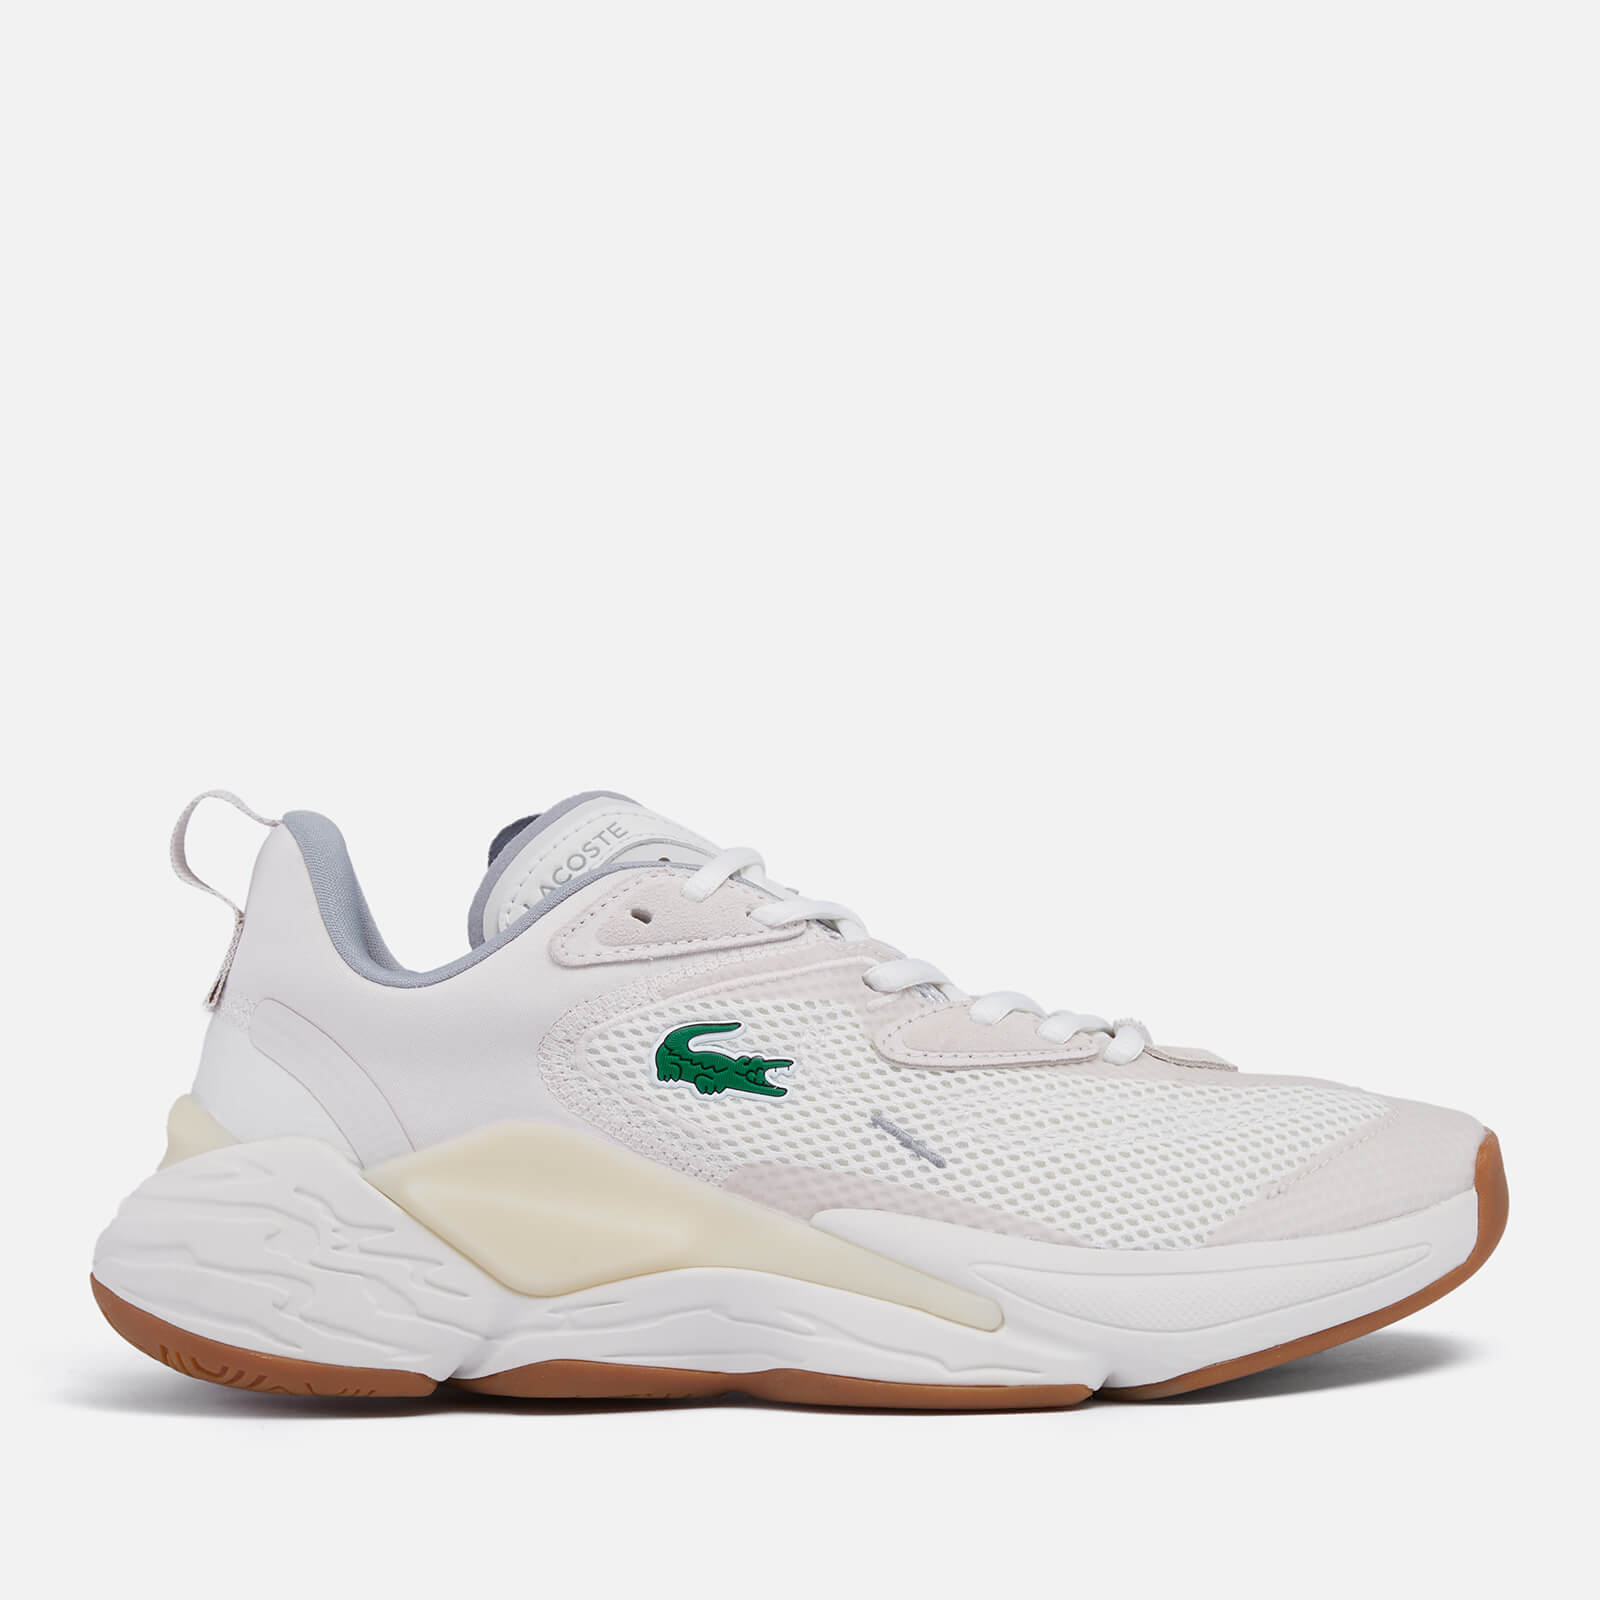 Lacoste Women's Aceshot 0722 1 Running Style Trainers - Off White/Off White - UK 3